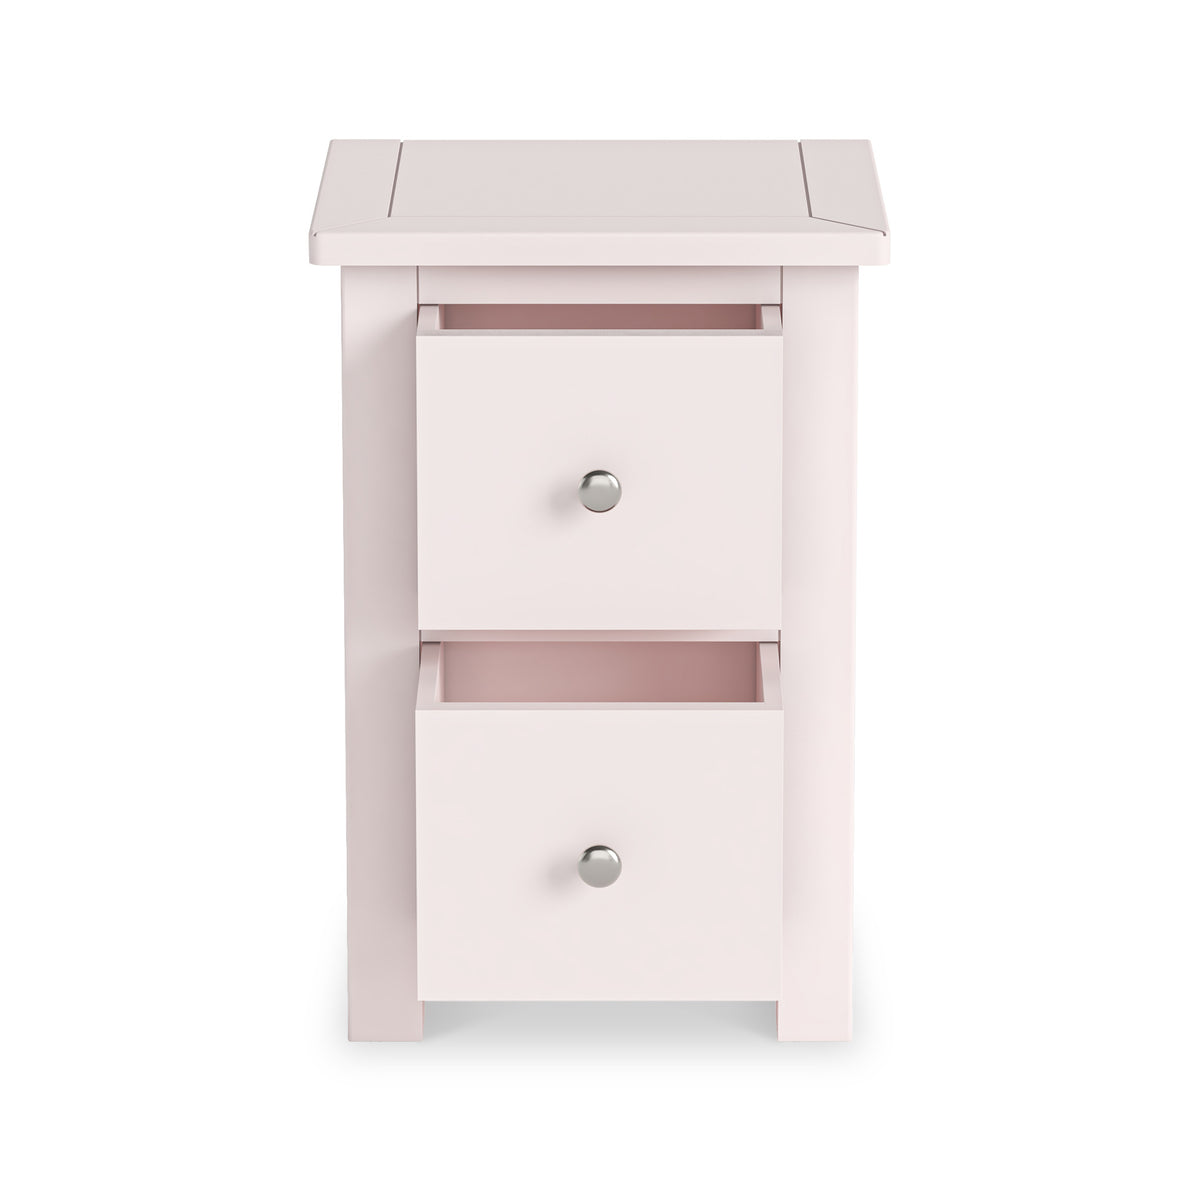 Duchy Dorchester Pink 2 Drawer Bedside Table from Roseland Furniture